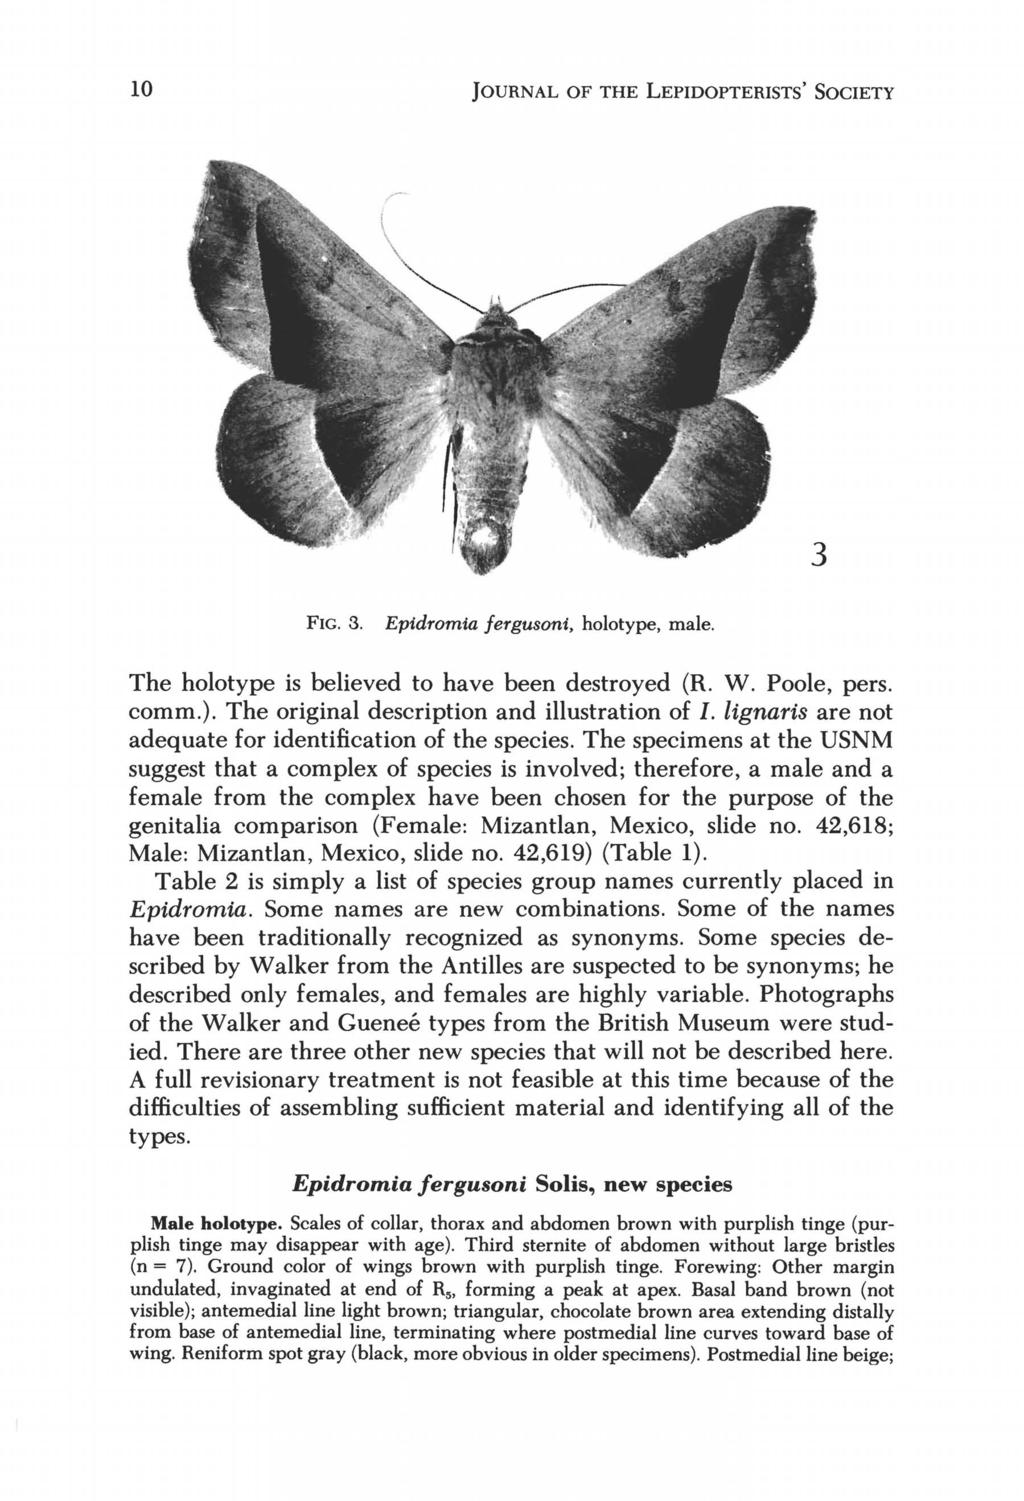 10 JOURNAL OF THE LEPIDOPTERISTS' SOCIETY FIG. 3. Epidromia jergusoni, holotype, male. The holotype is believed to have been destroyed (R. W. Poole, pers. comm.).